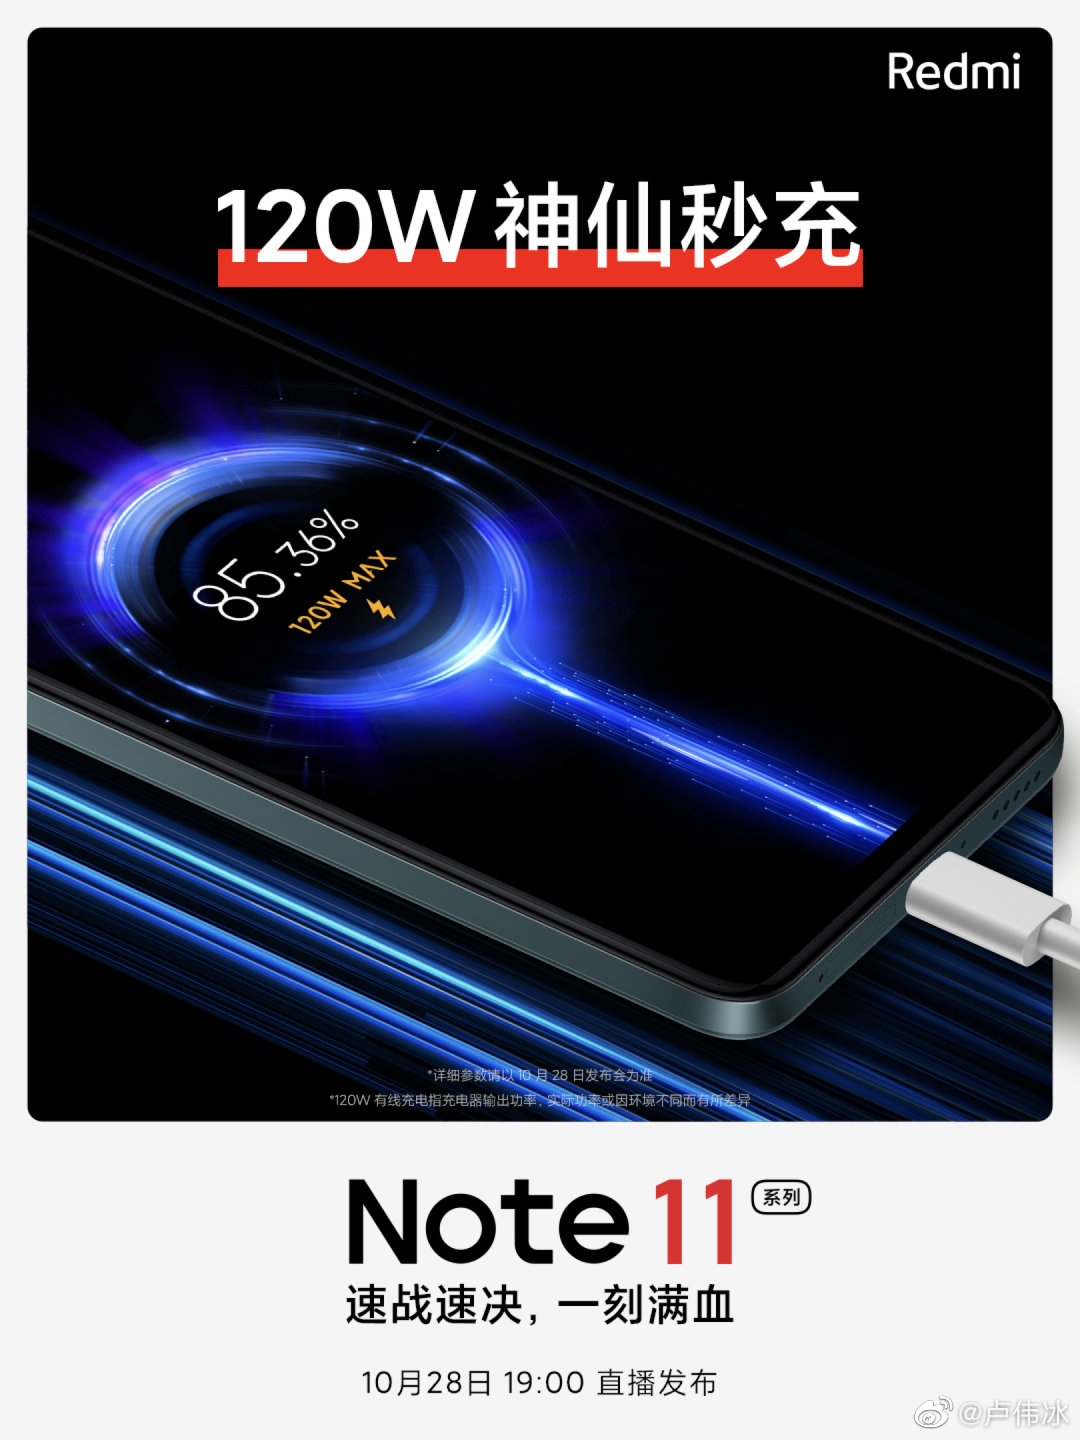 redmi note 11 teaser charging